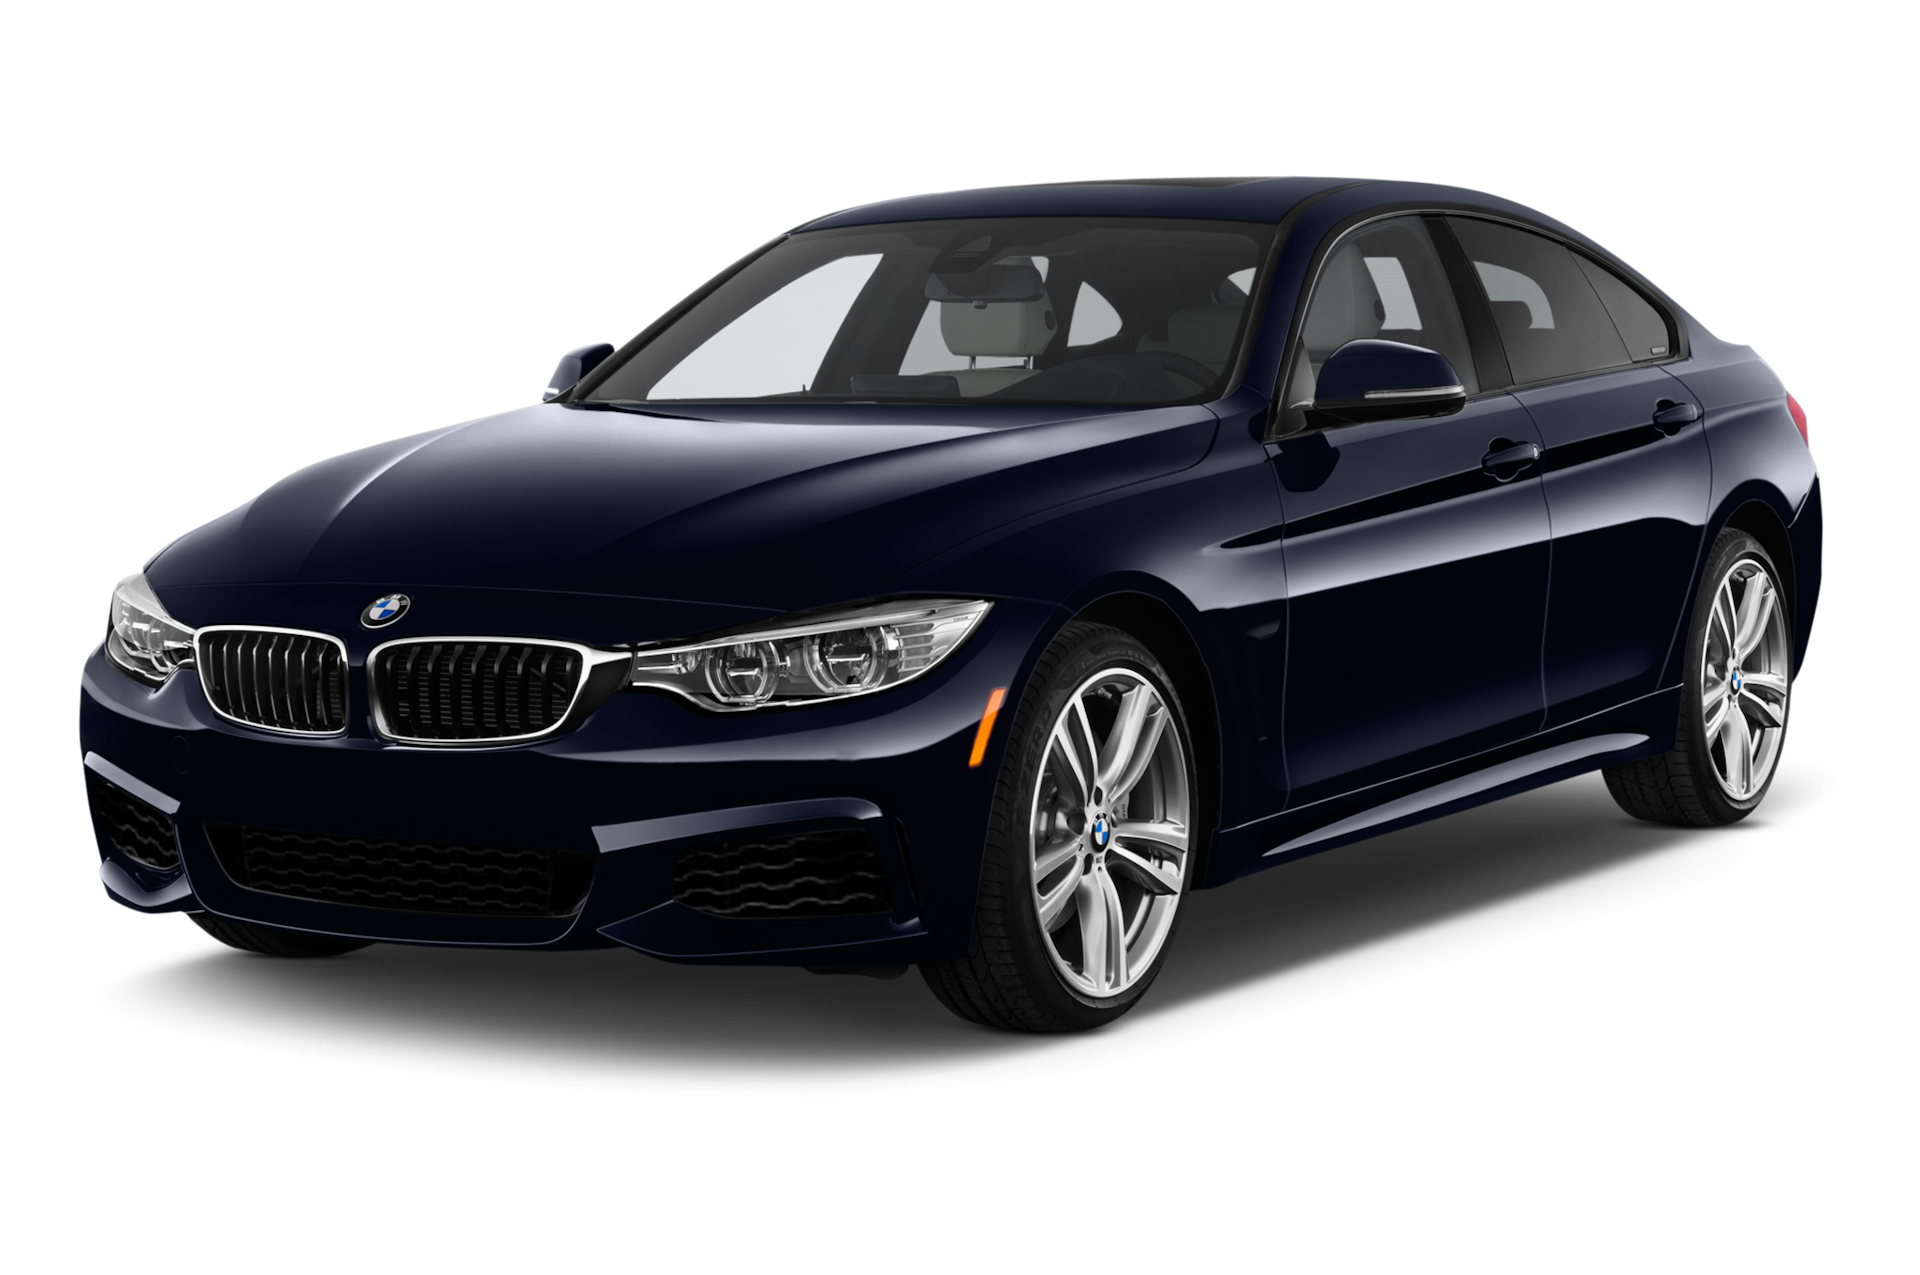 2015 BMW 4-Series Prices, Reviews, and Photos - MotorTrend